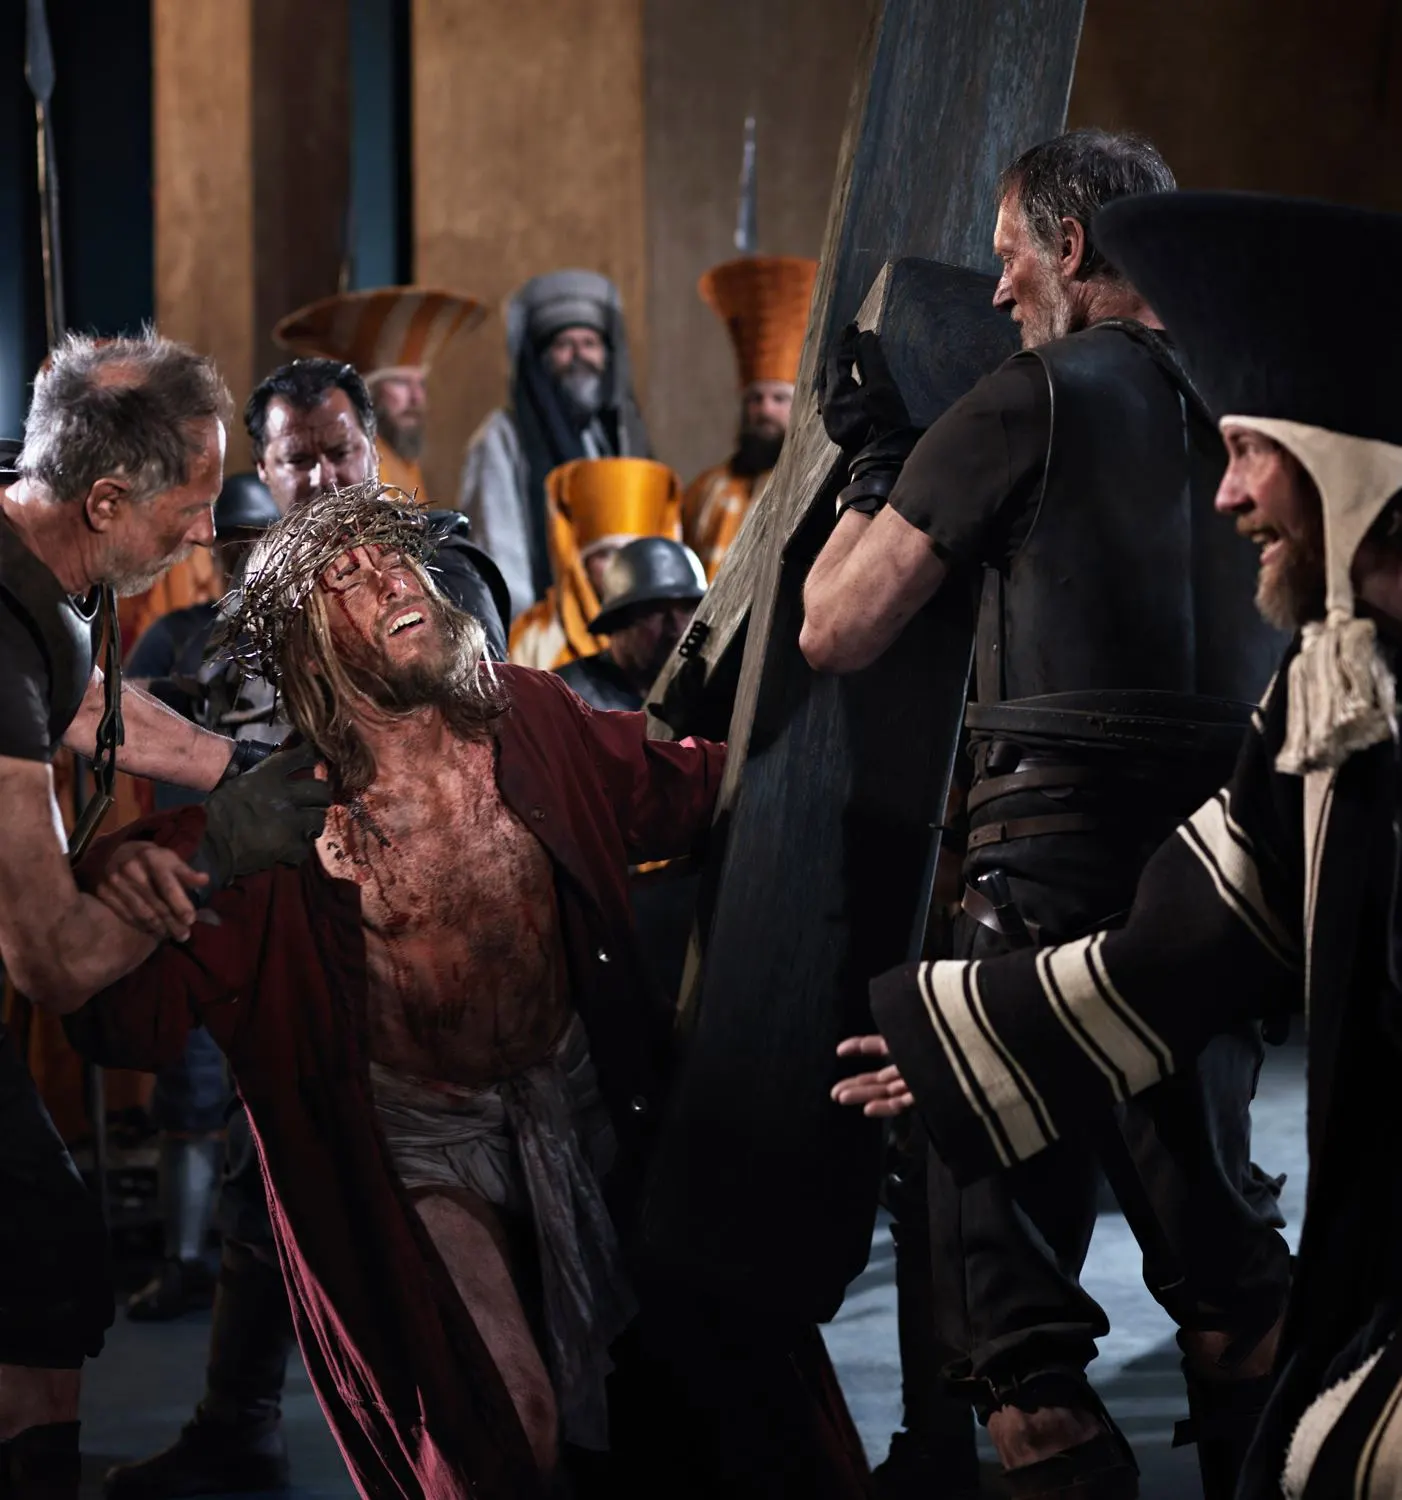 Way of the Cross - Oberammergau Passion Play 2020 Photos: Oberammergau Passion Play 2020